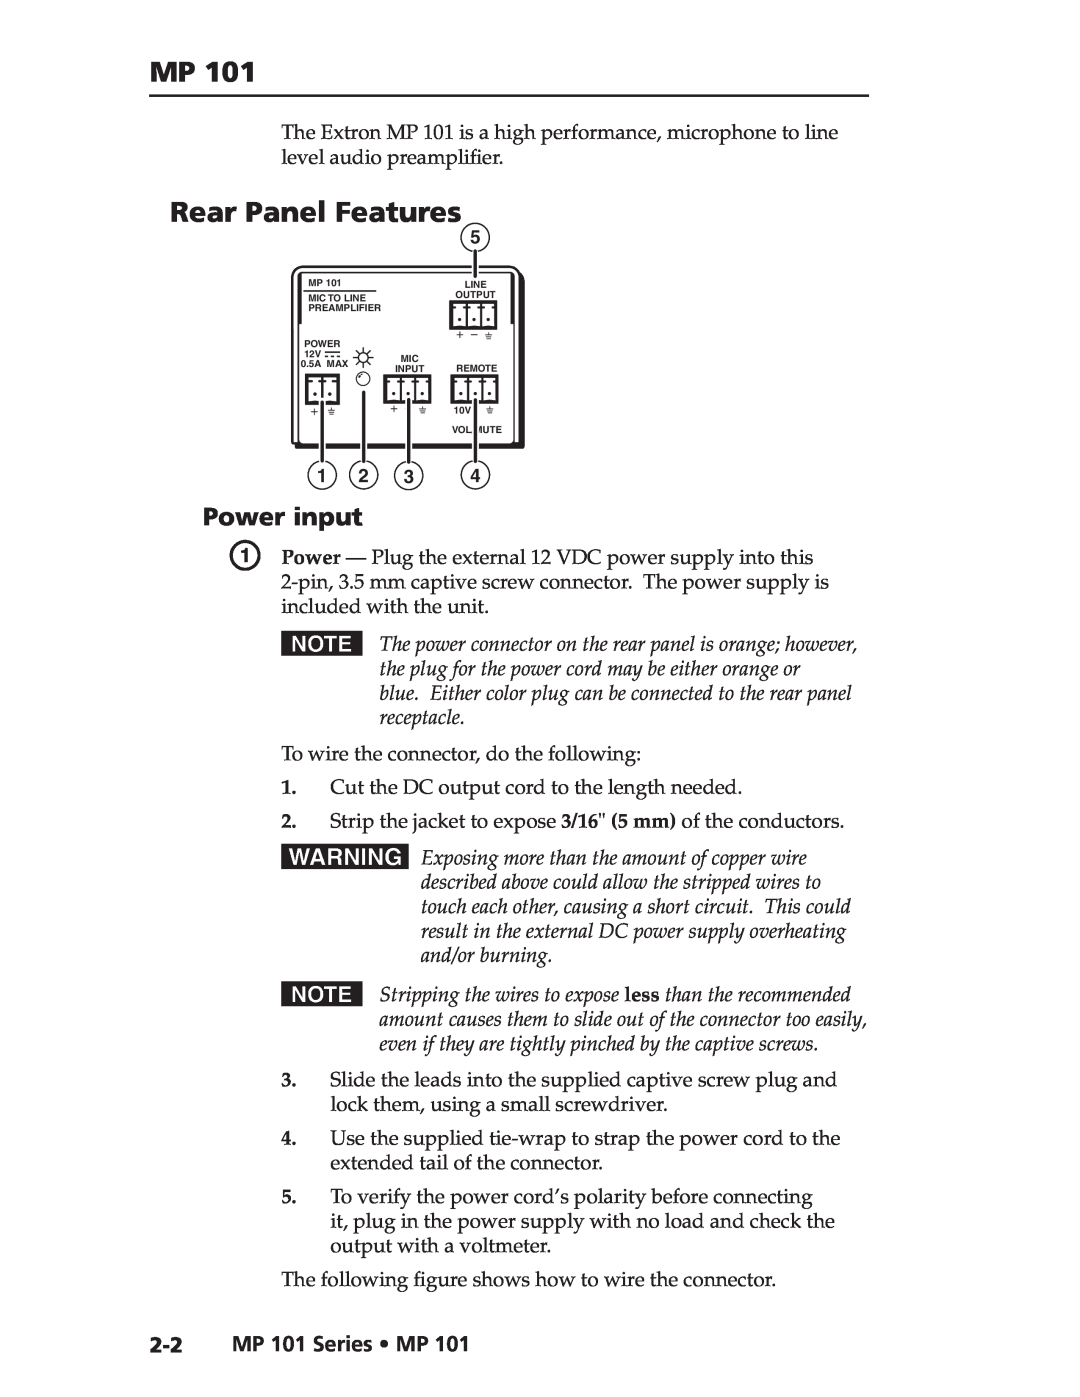 Extron electronic user manual Rear Panel Features, Power input, 2-2MP 101 Series MP 